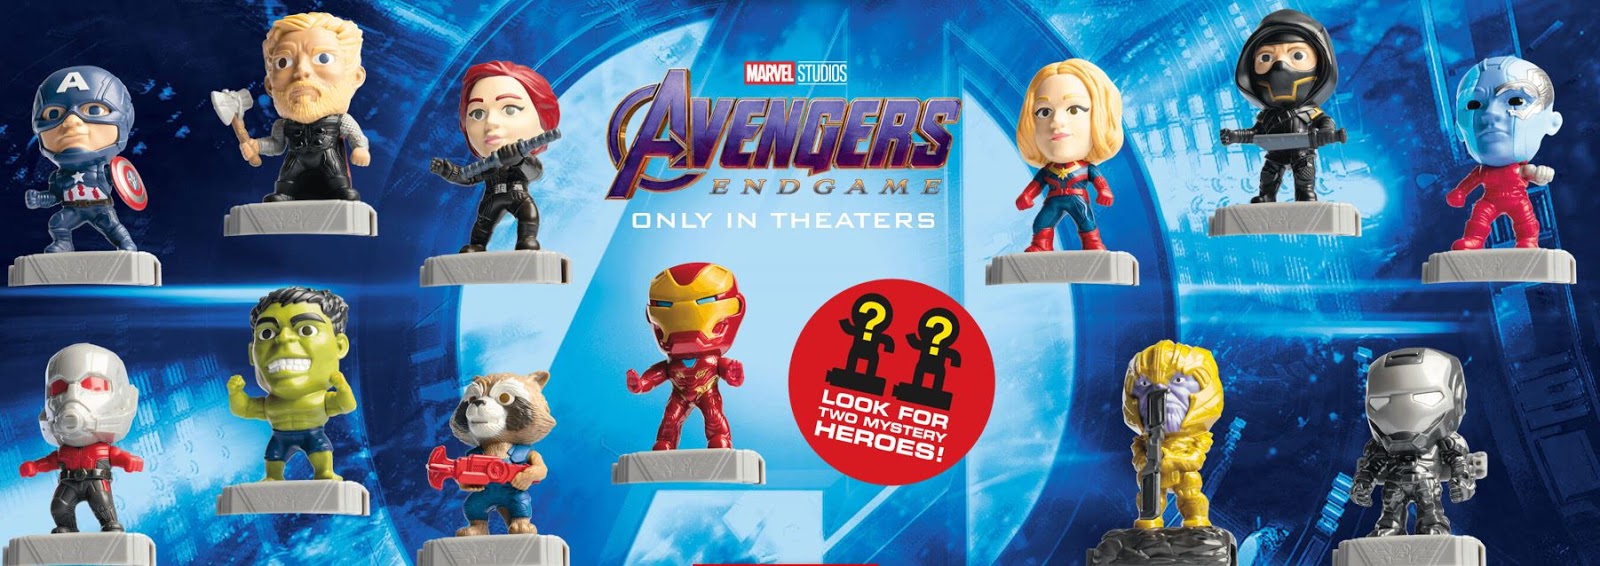 Avengers Endgame McDonald’s Happy Meal Toys Pick Your Toy! 